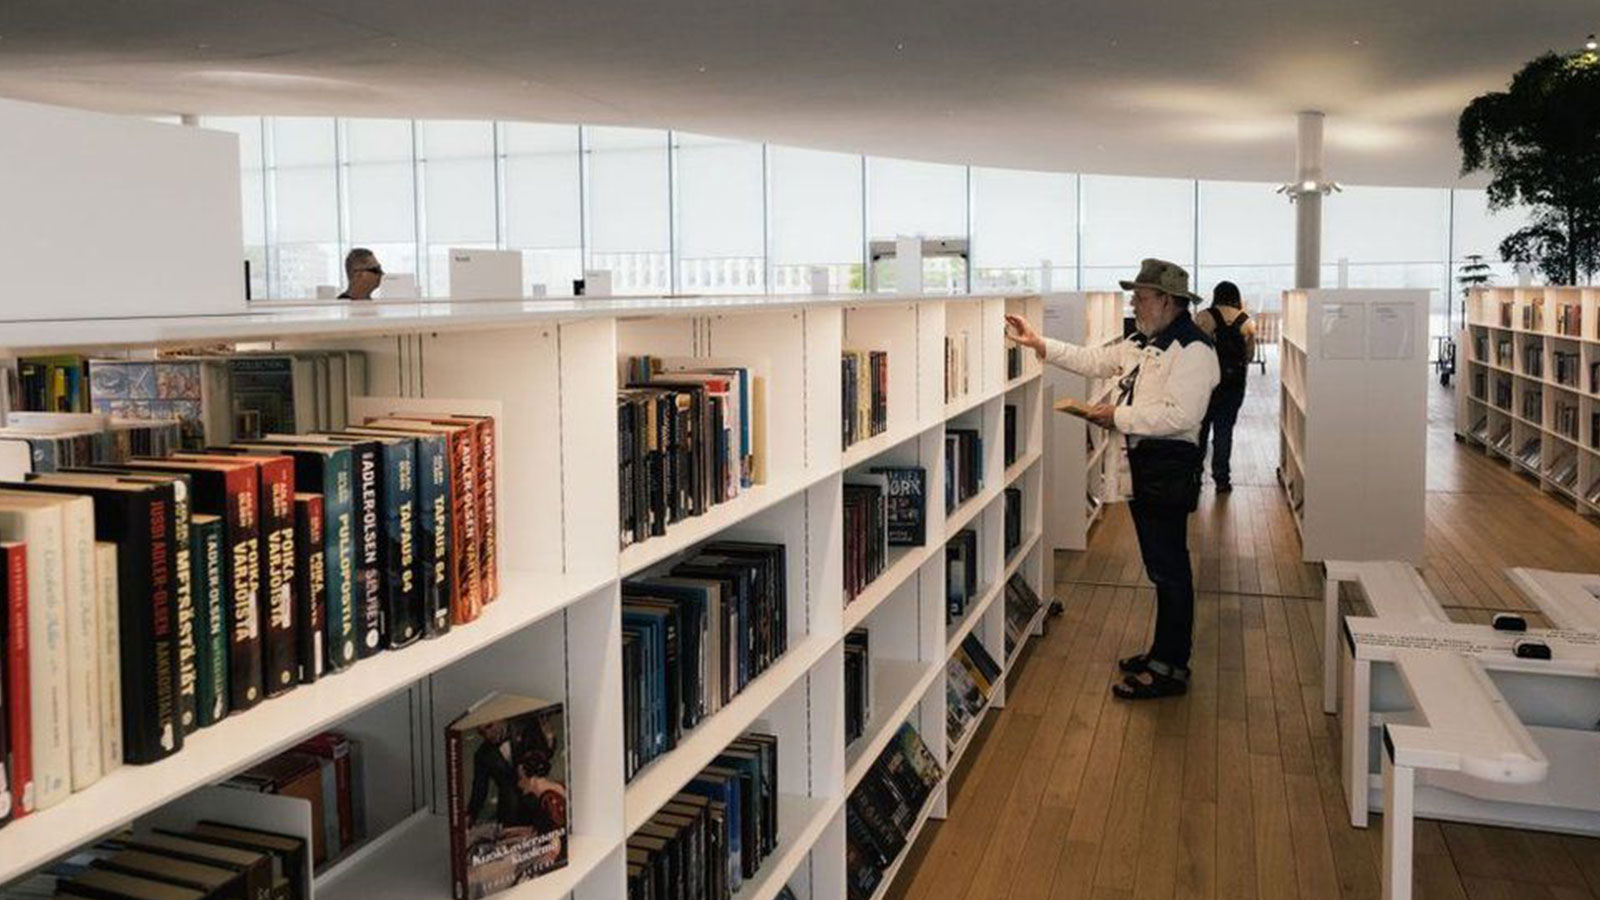 Many think Finland's wide network of public libraries also contributes to high media literacy